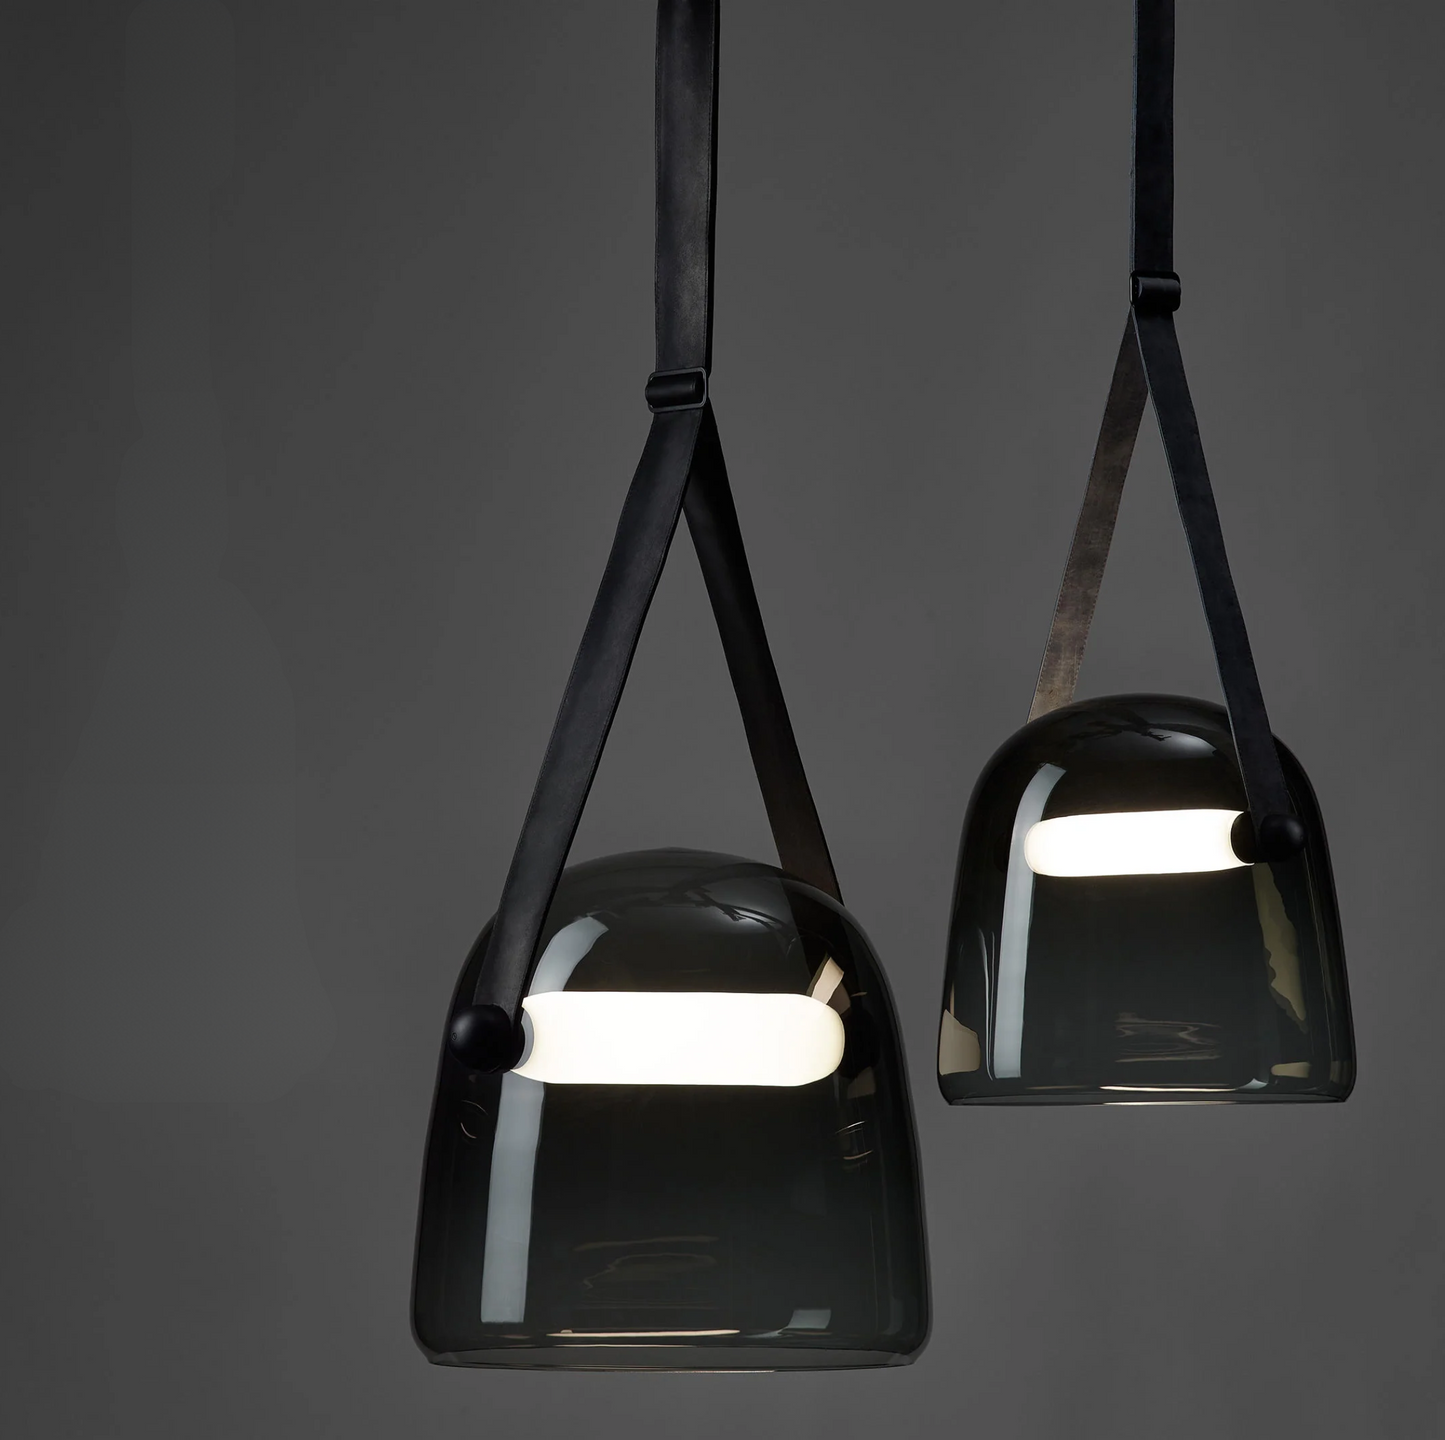 Load image into Gallery viewer, Modern Brokis Mona Led Pendant Lights by Gloss (9526)
